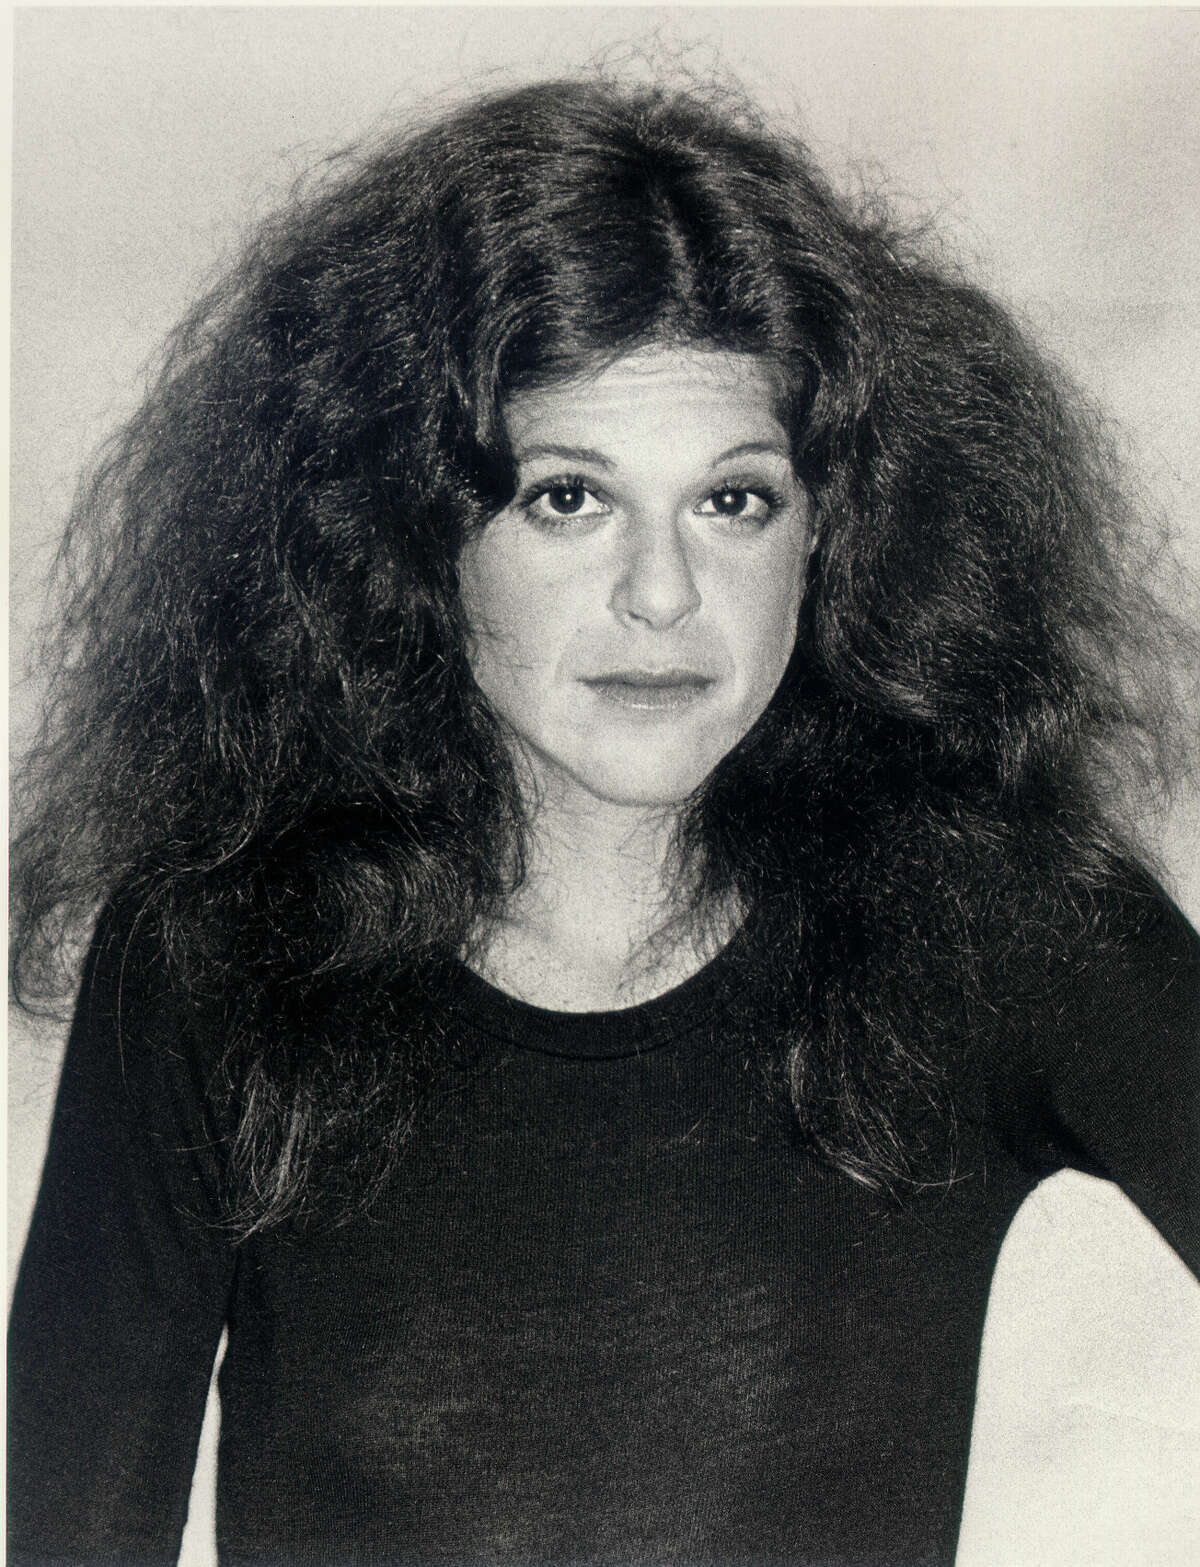 Gilda Radner Radner, an original cast member of Saturday Night Live is sketch comedy legend. Perhaps best known for her personal advice expert character Roseanne Roseannadanna and "Baba Wawa", a parody of Barbara Walters, the actress died at the age of 42 from cancer. She was married to actor Gene Wilder. Take a look back at some of the most memorable female cast members of Saturday Night Live through the show's 40 year history in this slideshow.